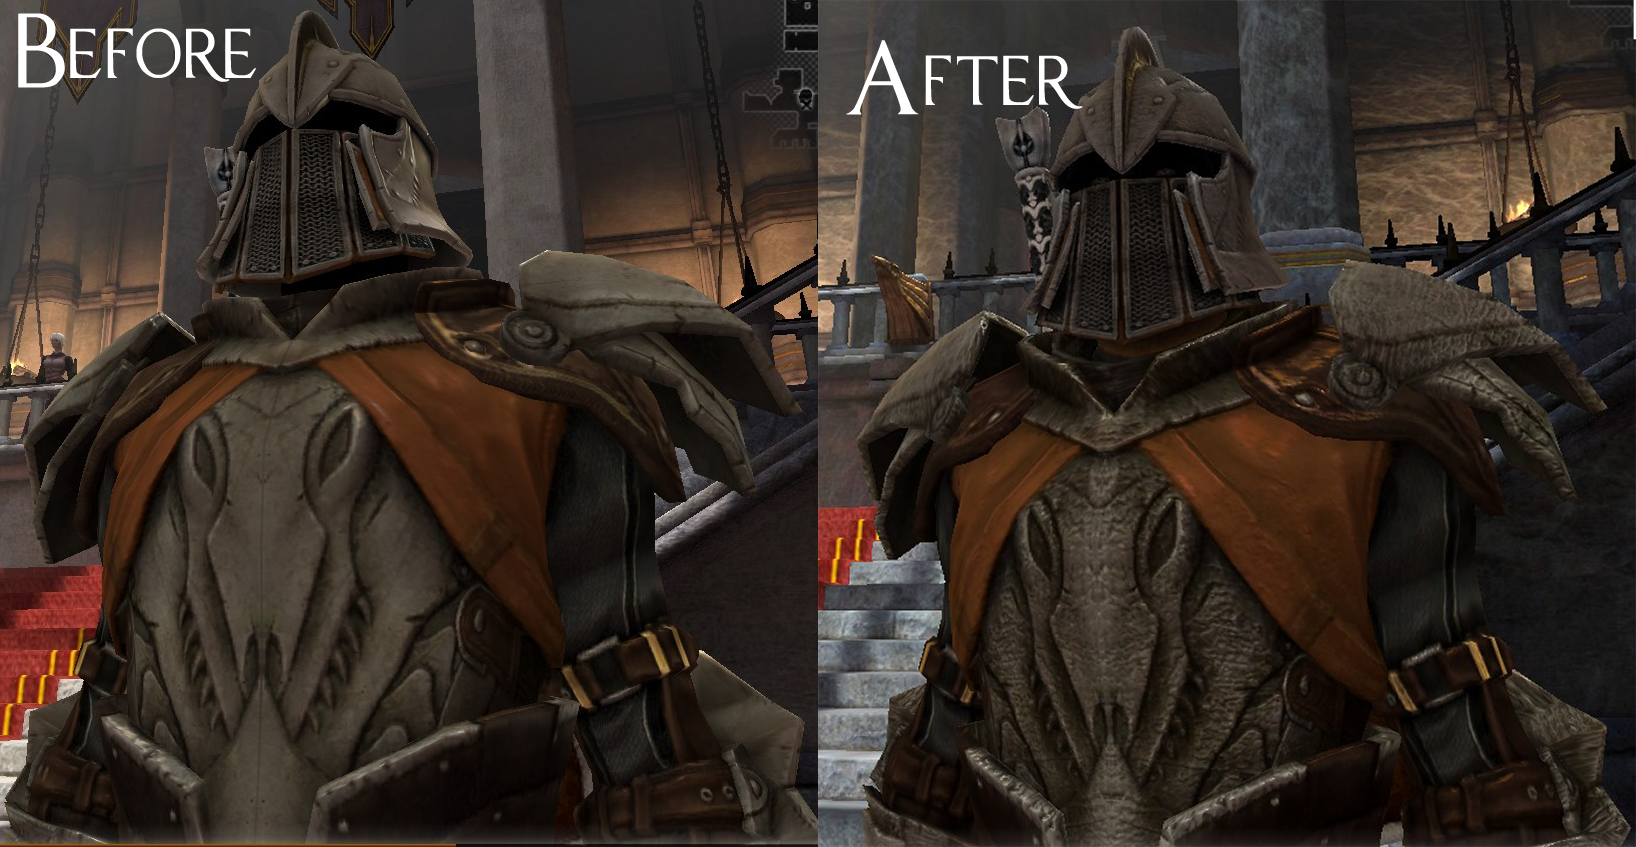 4Aces DA2: HiRes Armor Re-Tex Comps image - Age 2: Re-Imagined mod for Dragon Age II - Mod DB